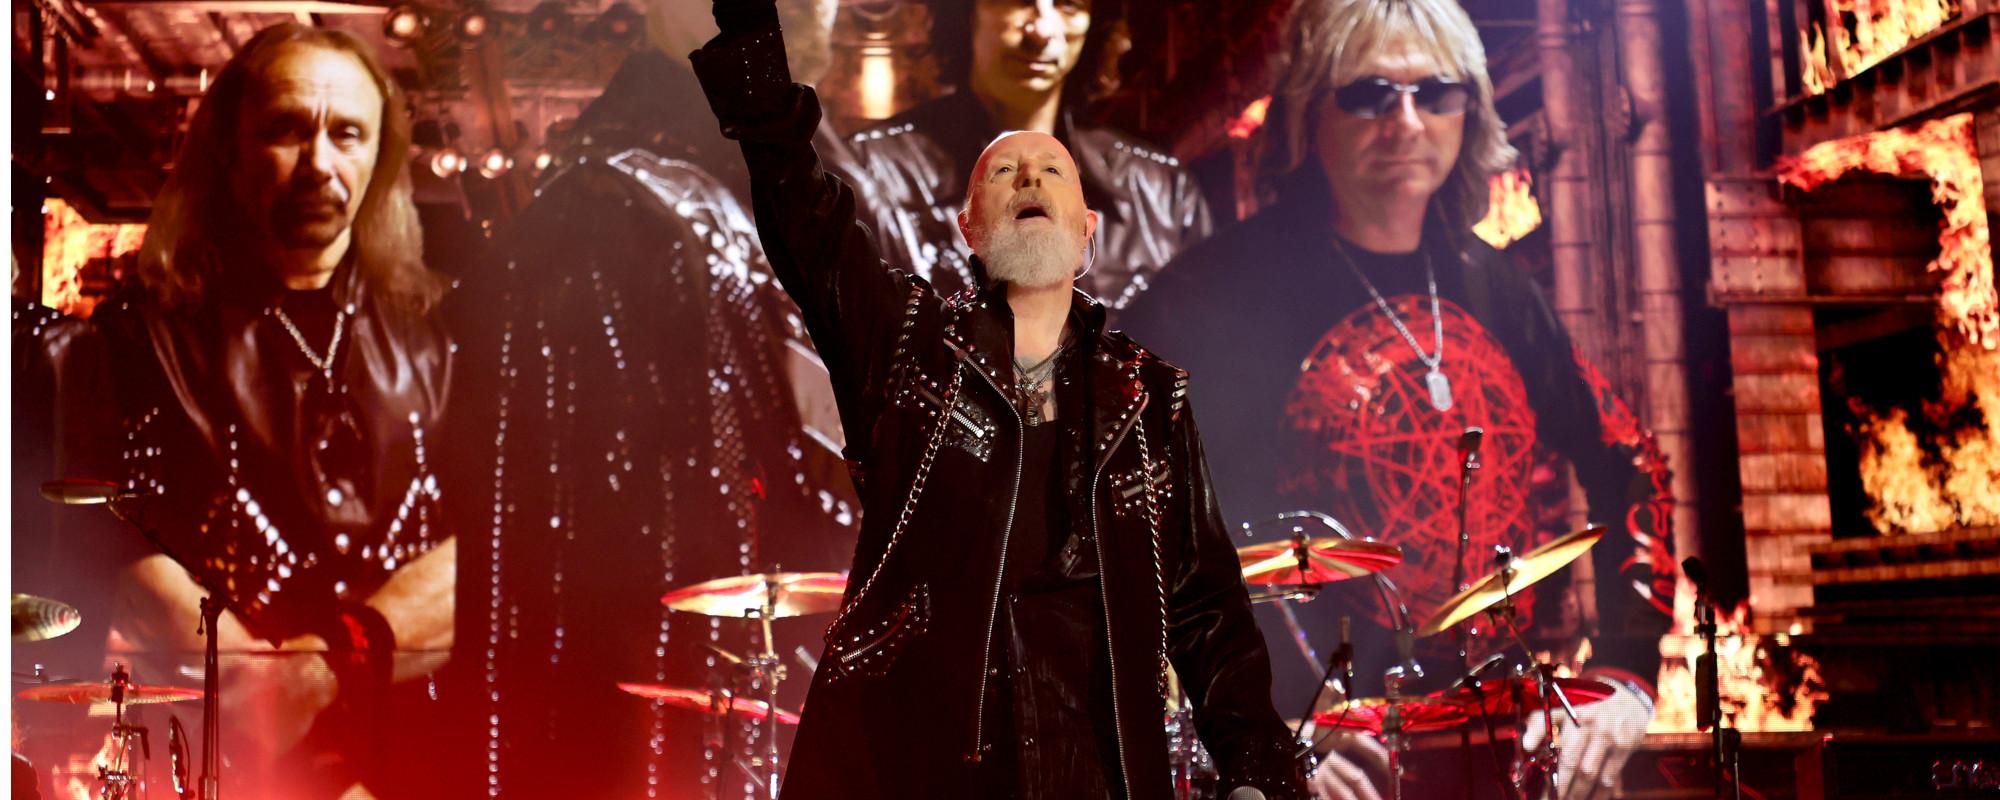 Judas Priest Just Made Heavy Metal History—50 Years in the Making